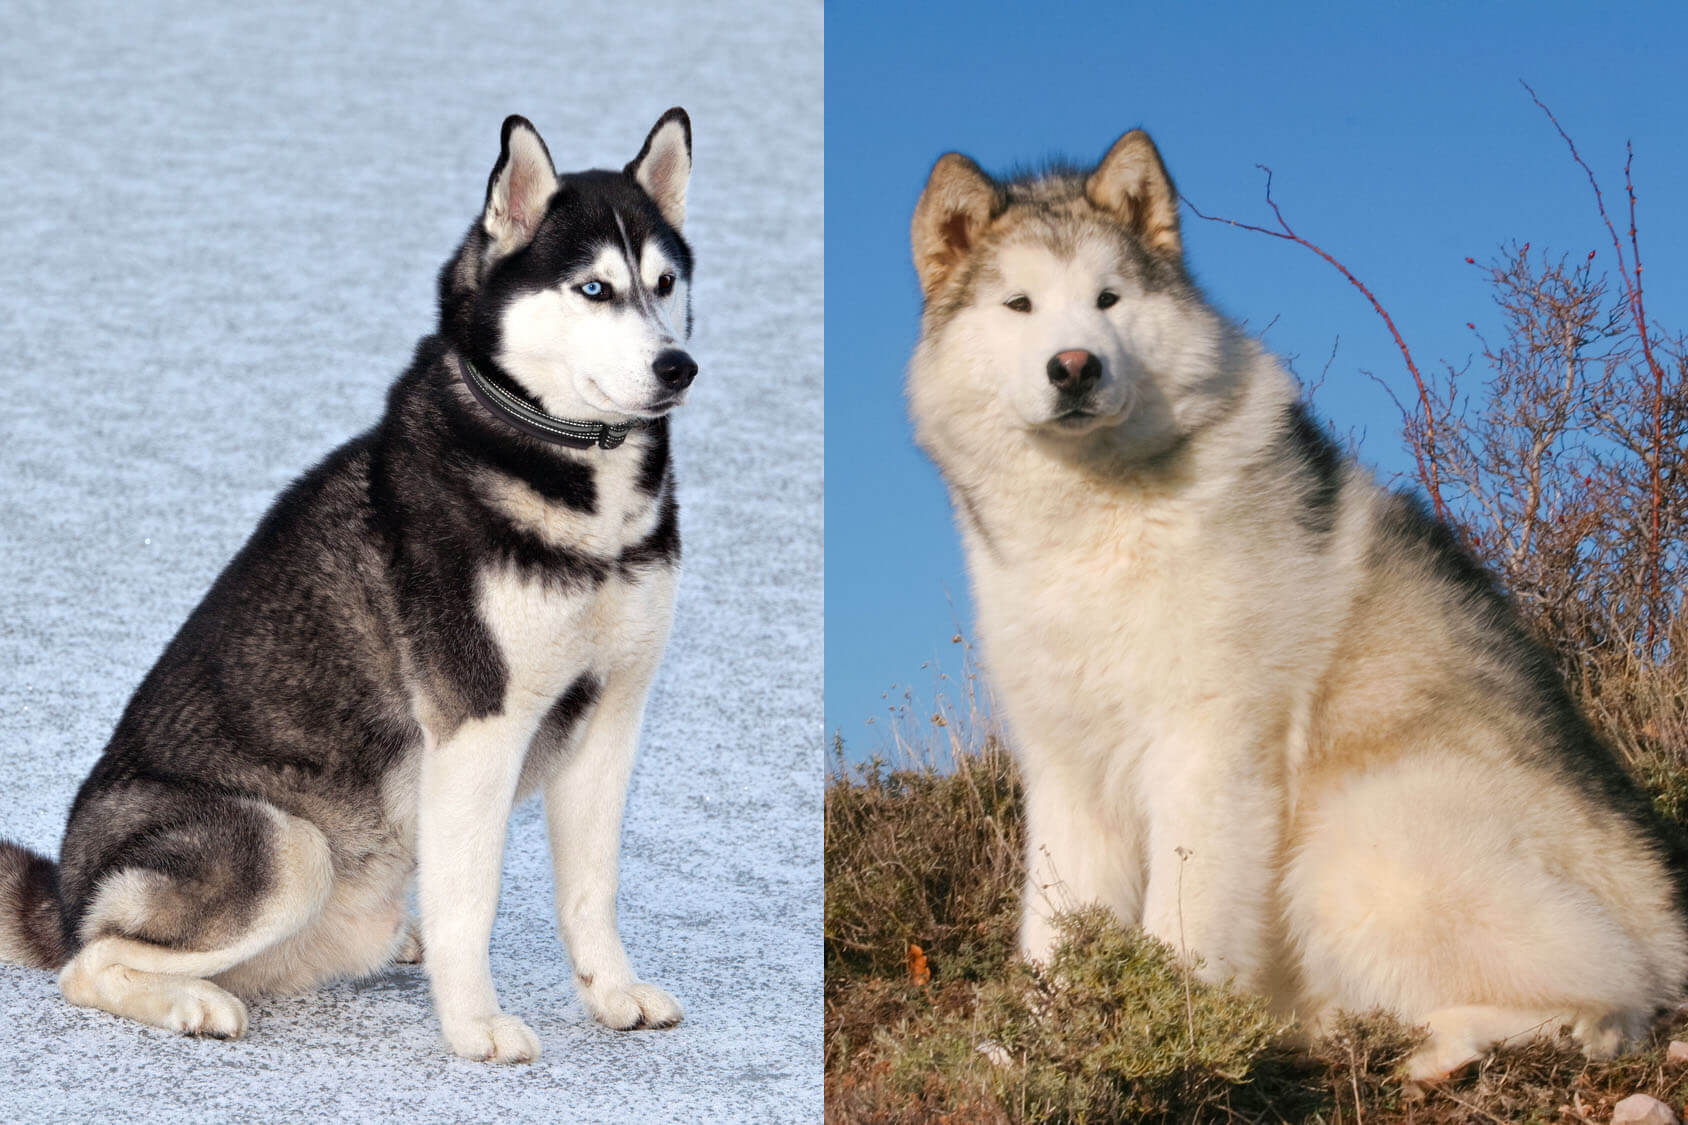 Husky And Malamute: Can You Tell Their Differences? Husky Facts